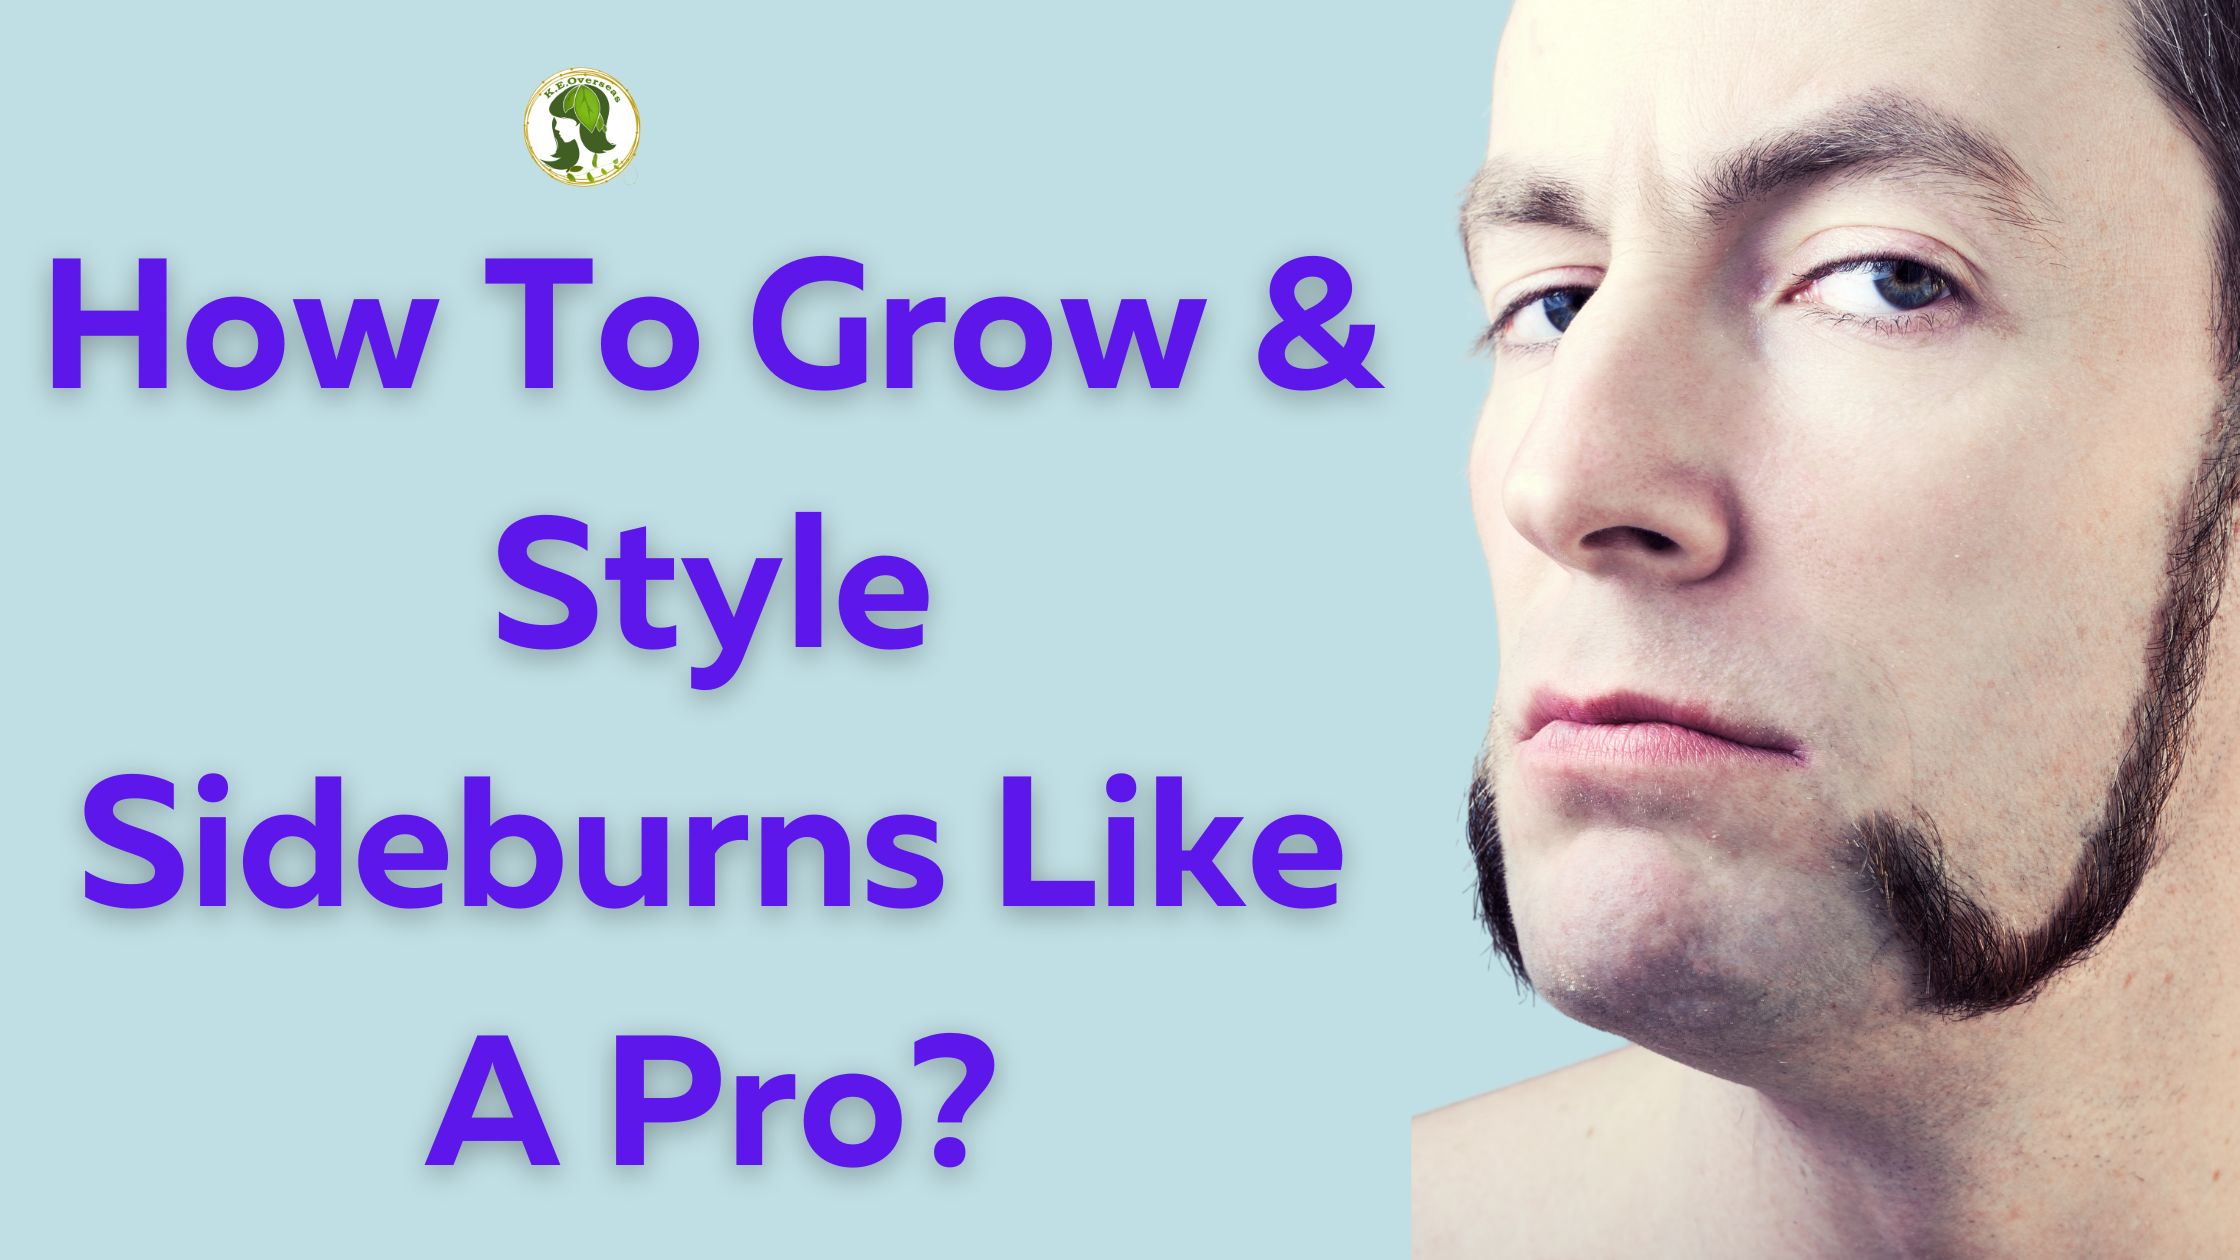 How To Grow & Style Sideburns Like A Pro